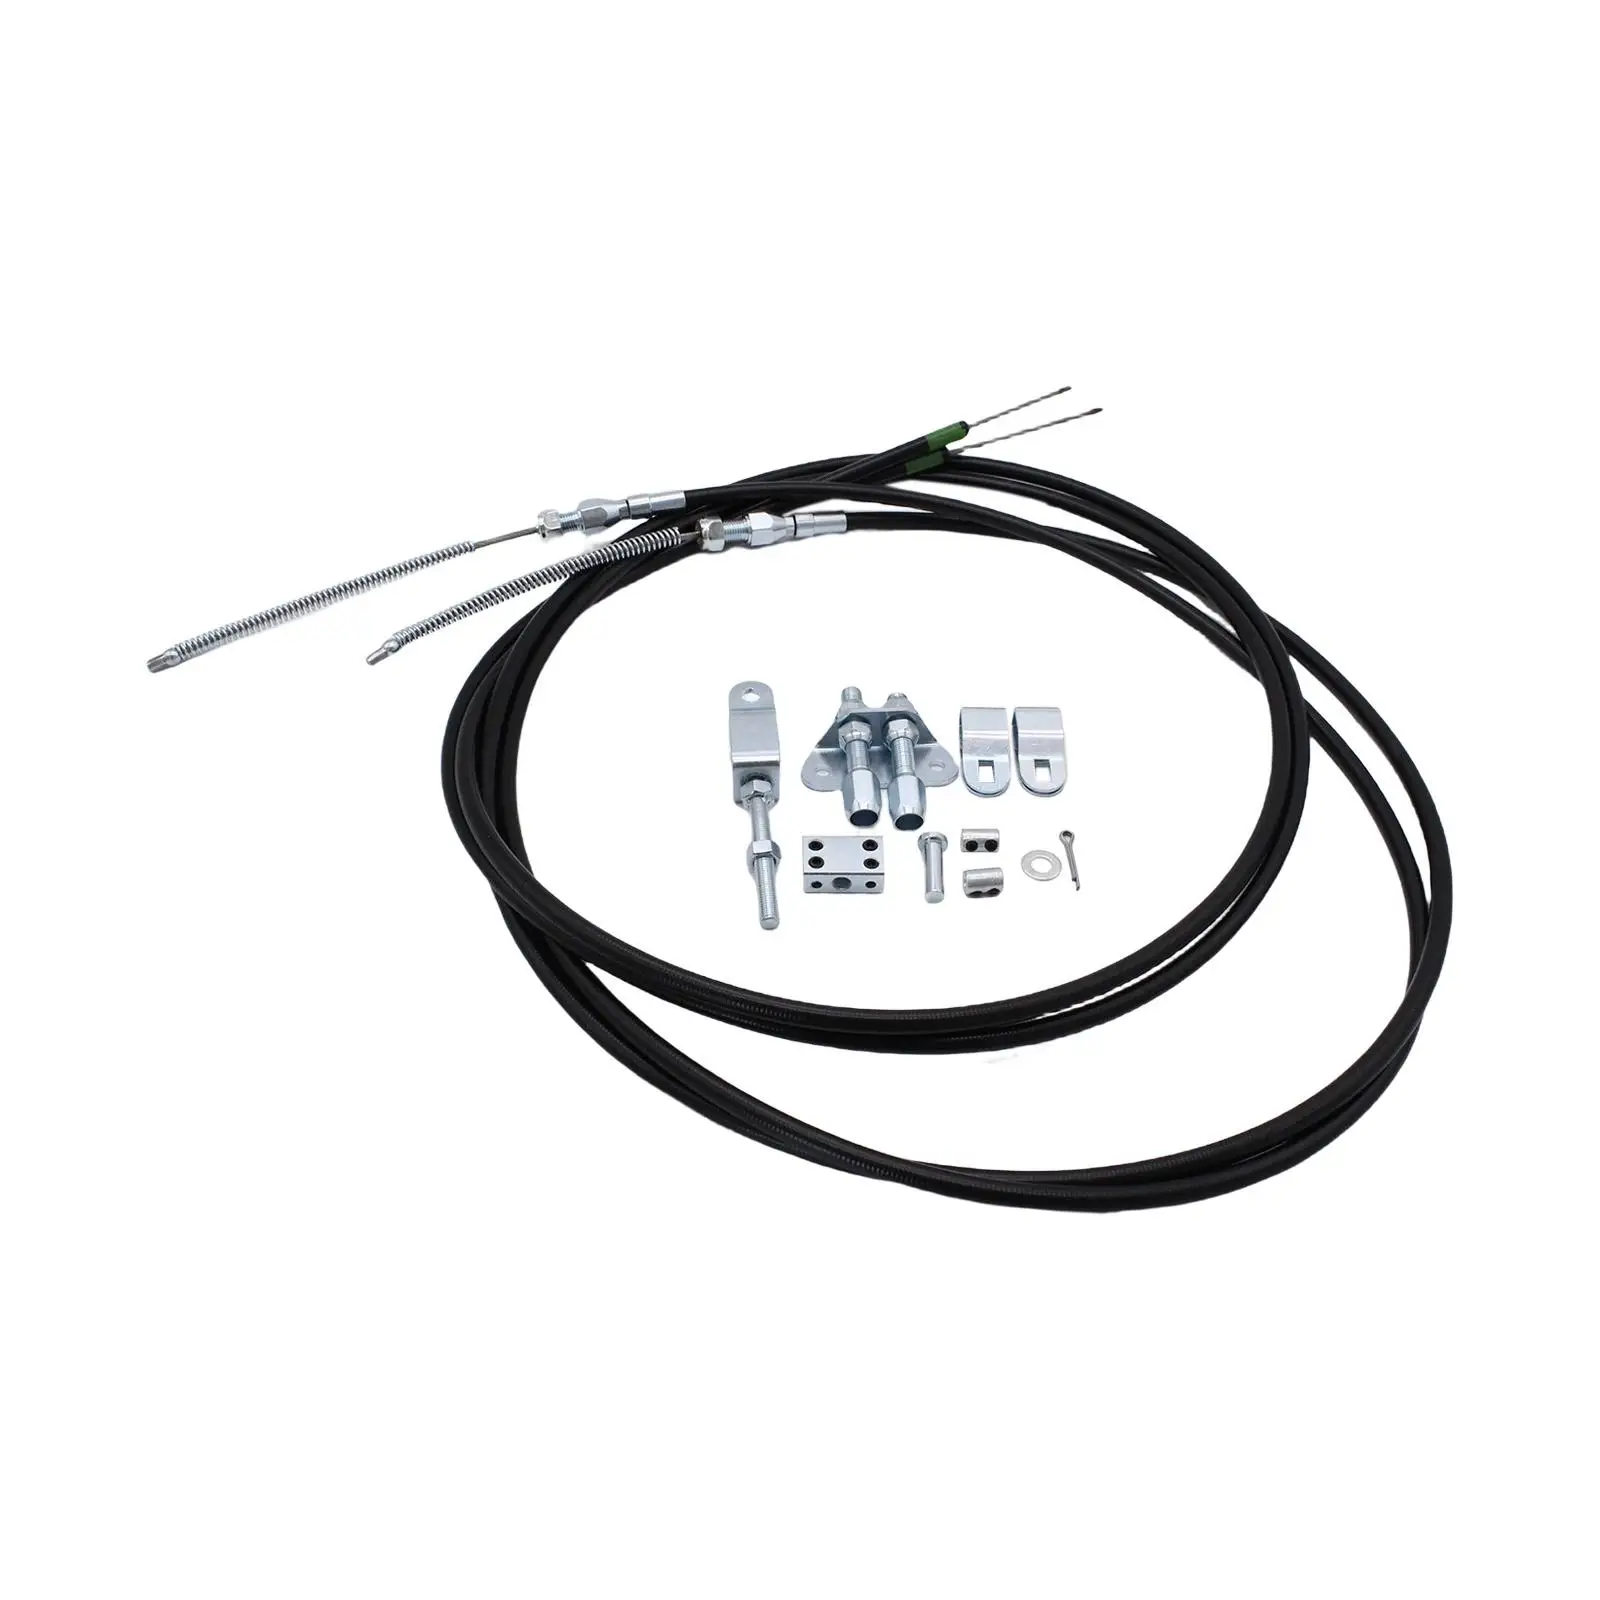 Universal Parking Brake Cable Kit 330-9371 Flexible Wear Resistant for Disc or Drum Brakes